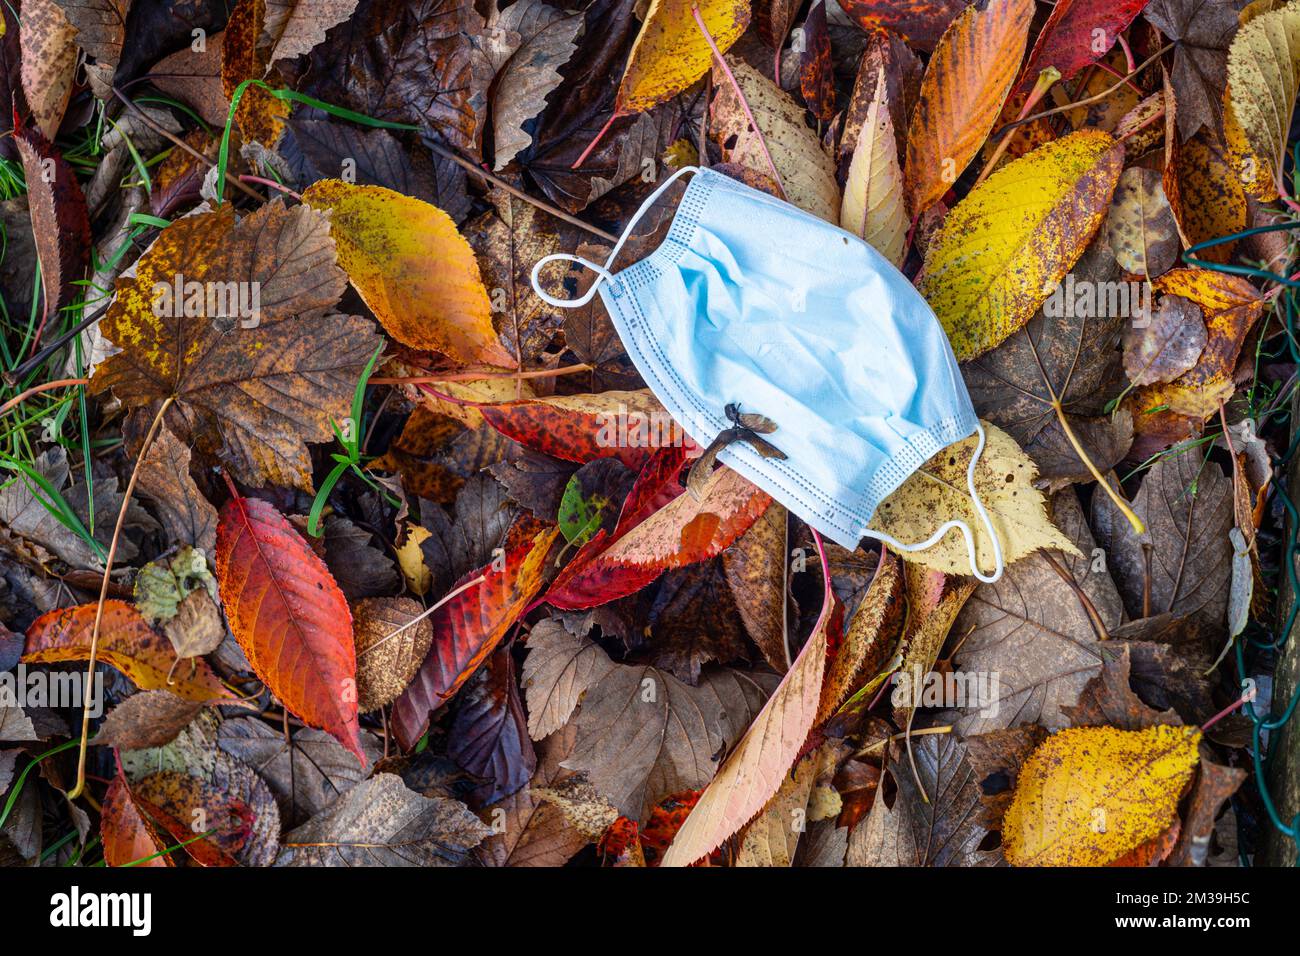 Blue medical face mask discarded on leaves in autumn or fall colour Stock Photo